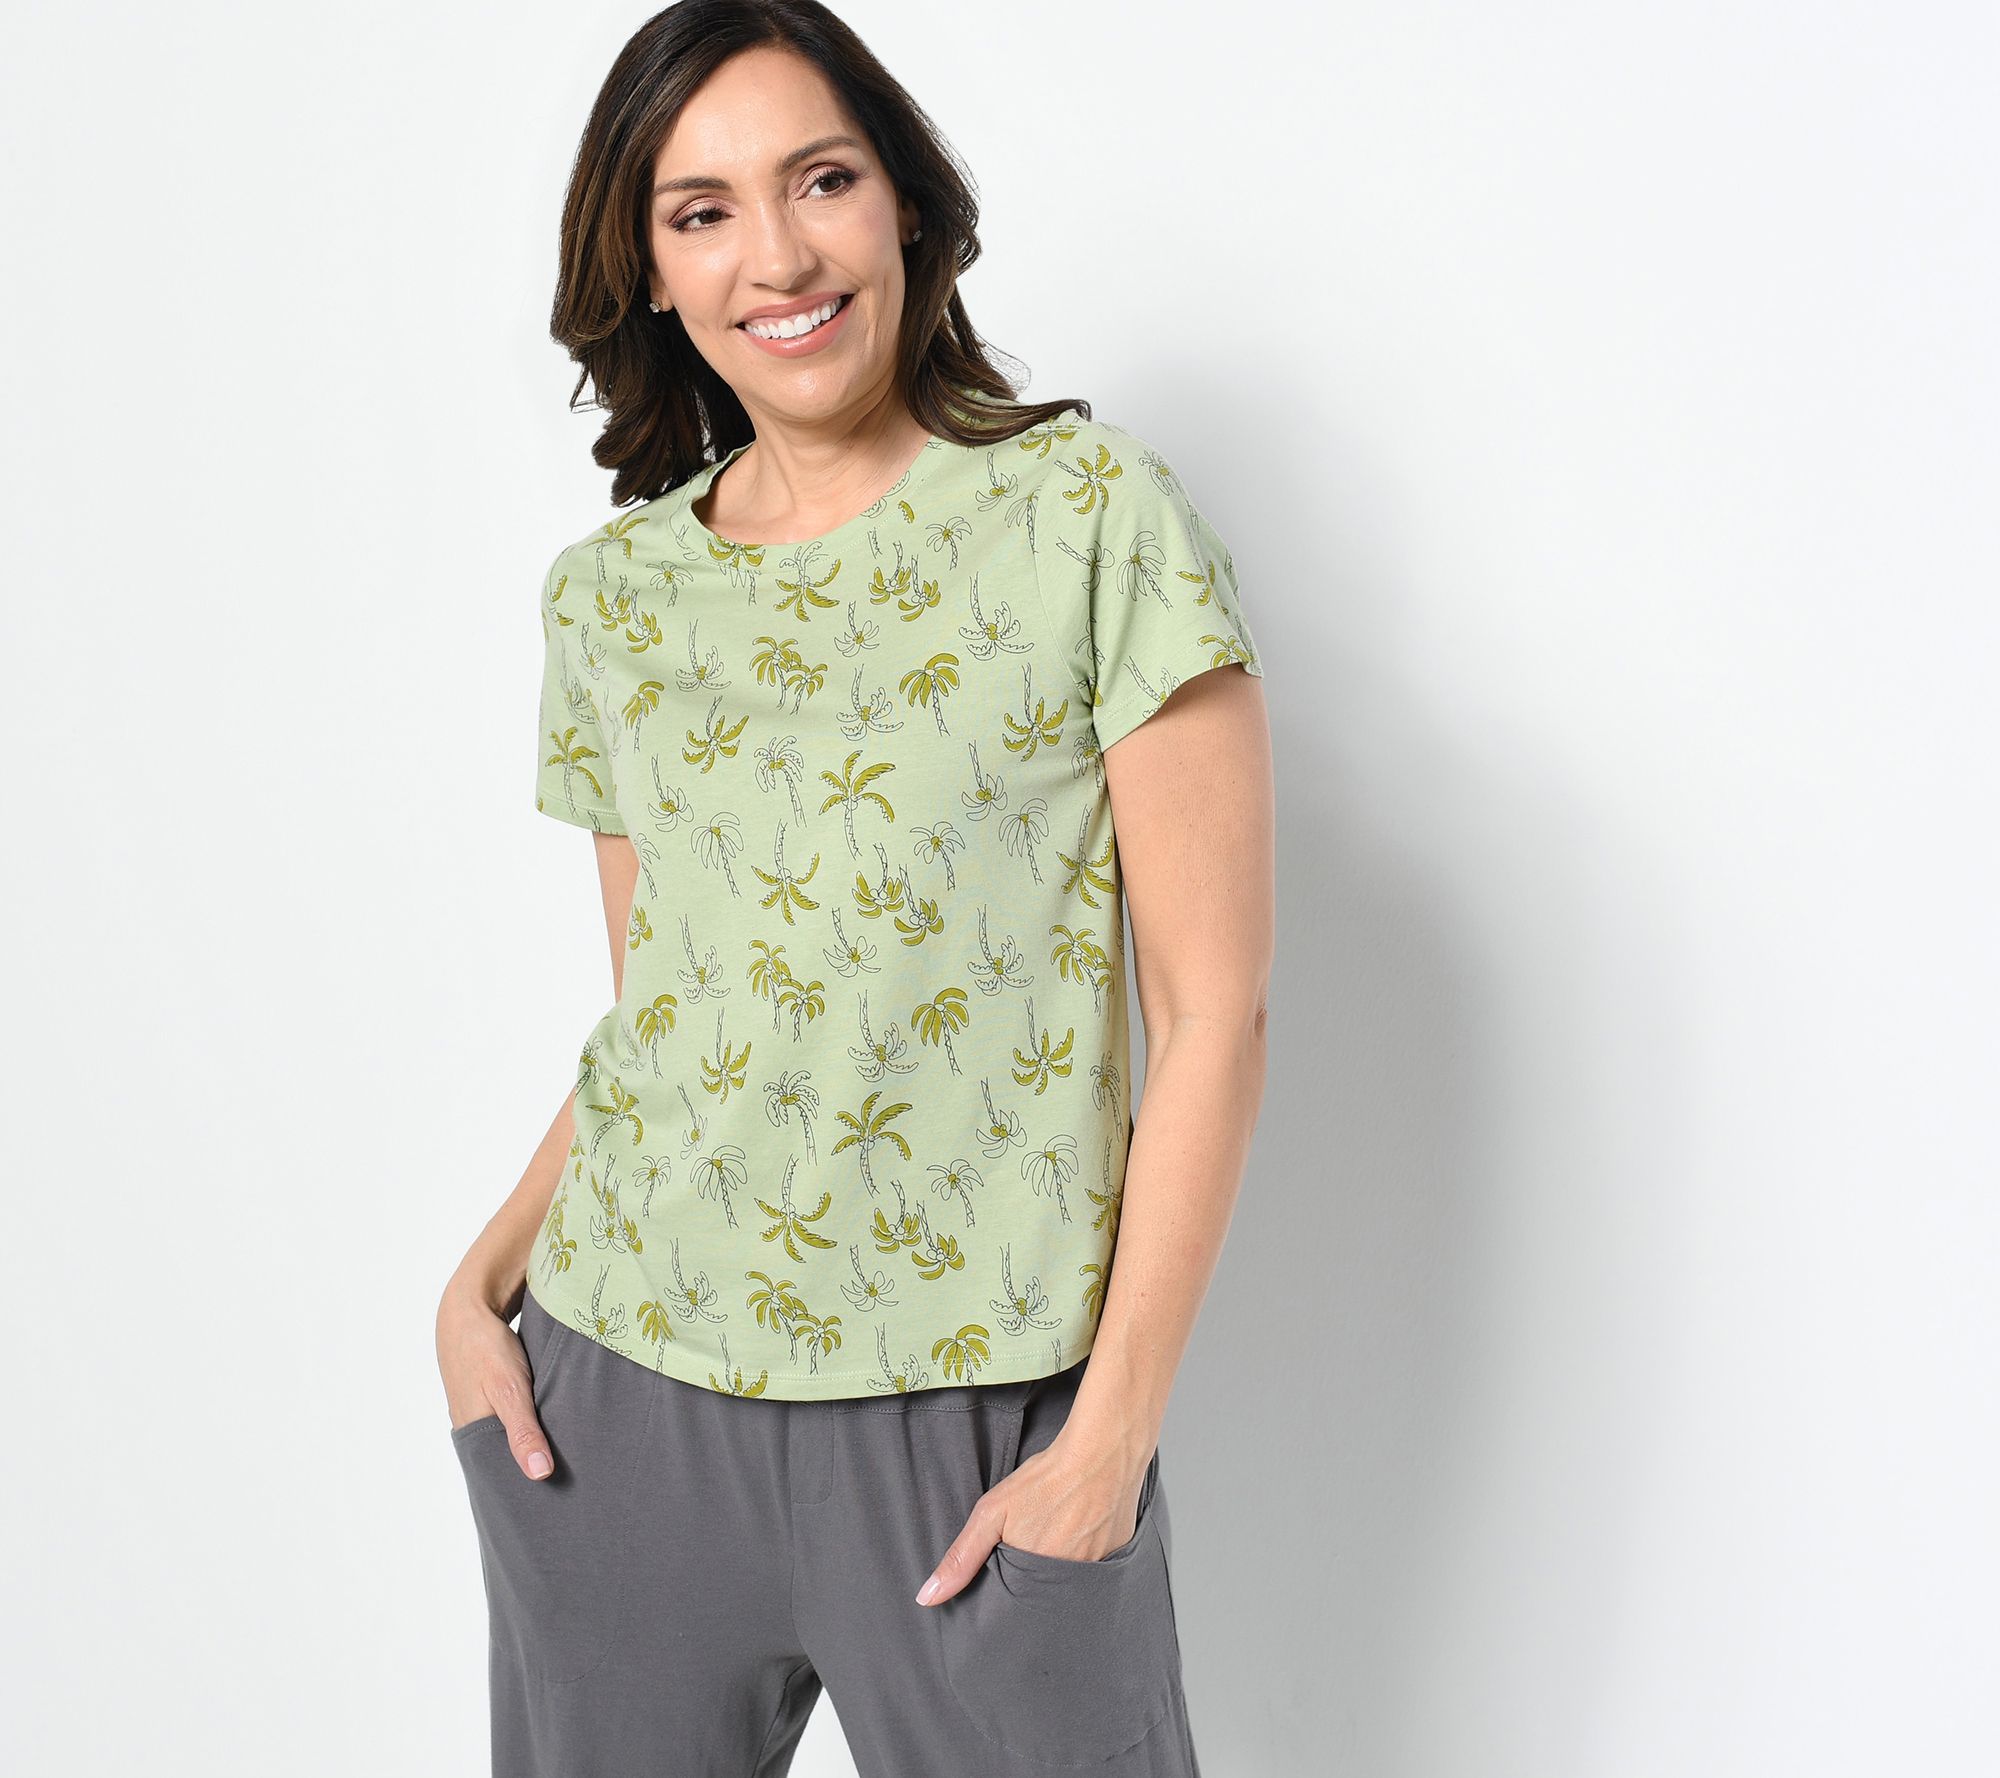 AnyBody Cozy Knit Luxe Jersey Graphic Tee - QVC.com